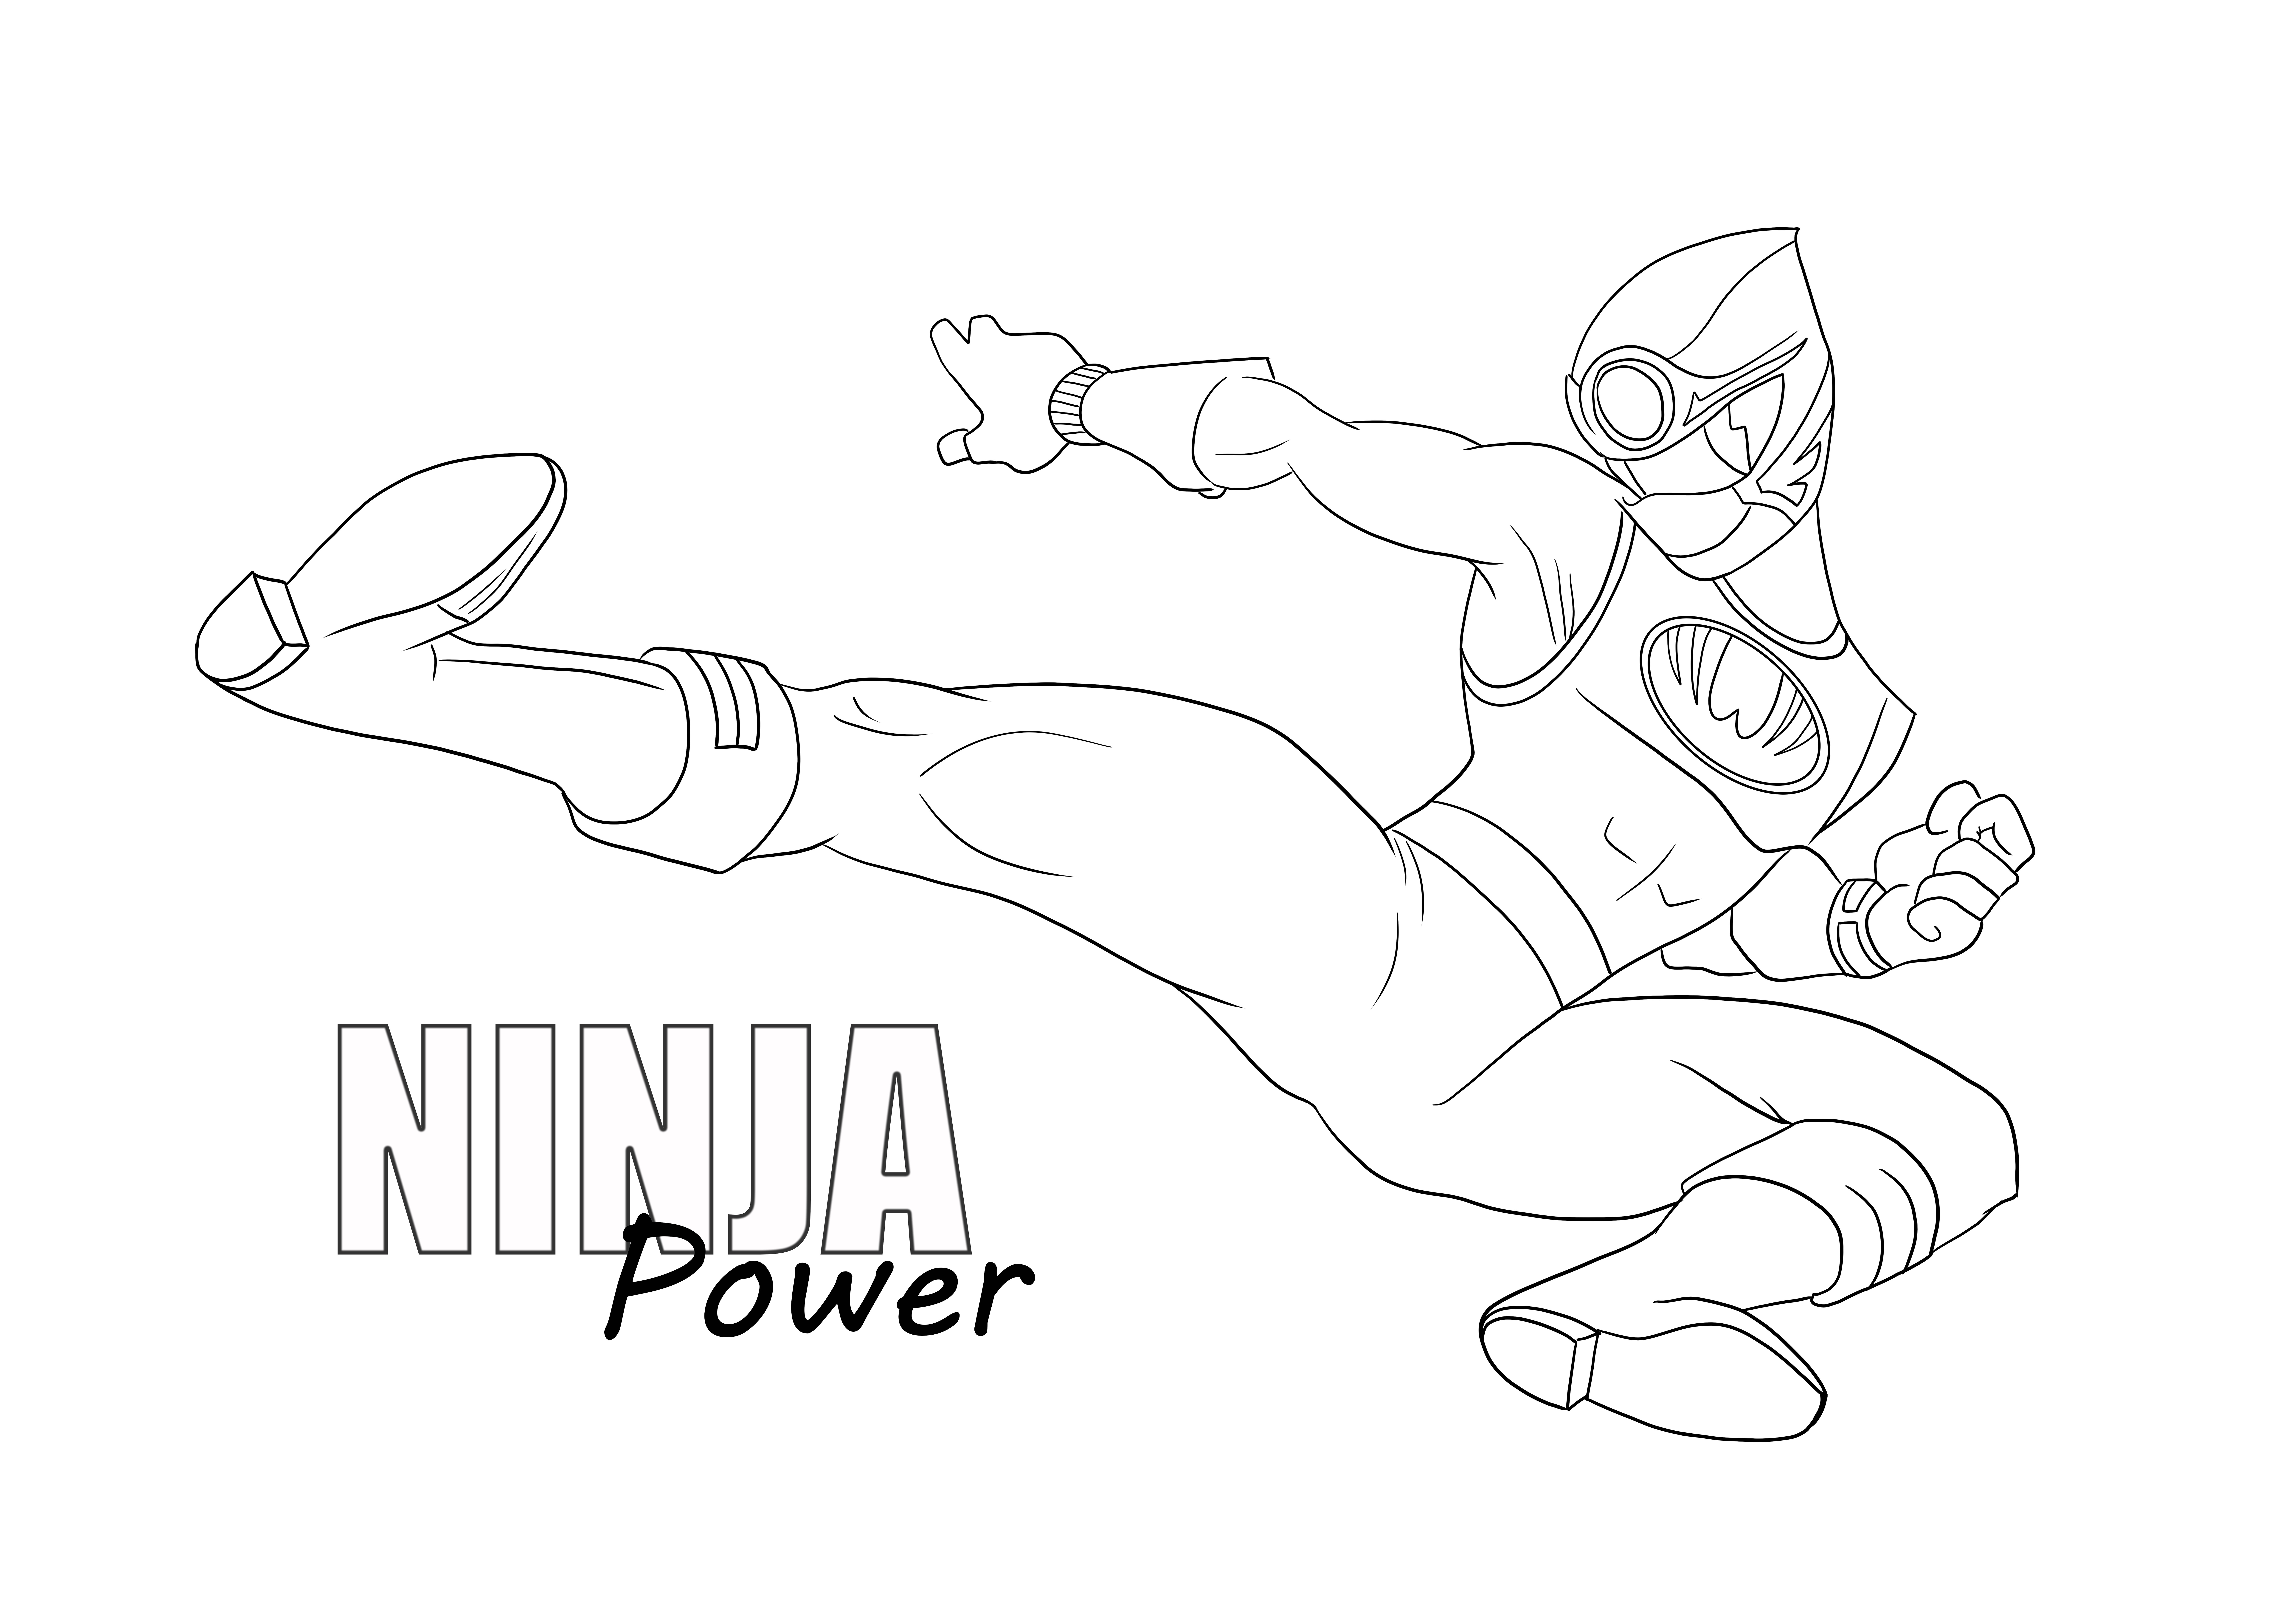 Ninja power to color and print for free for kids of all ages